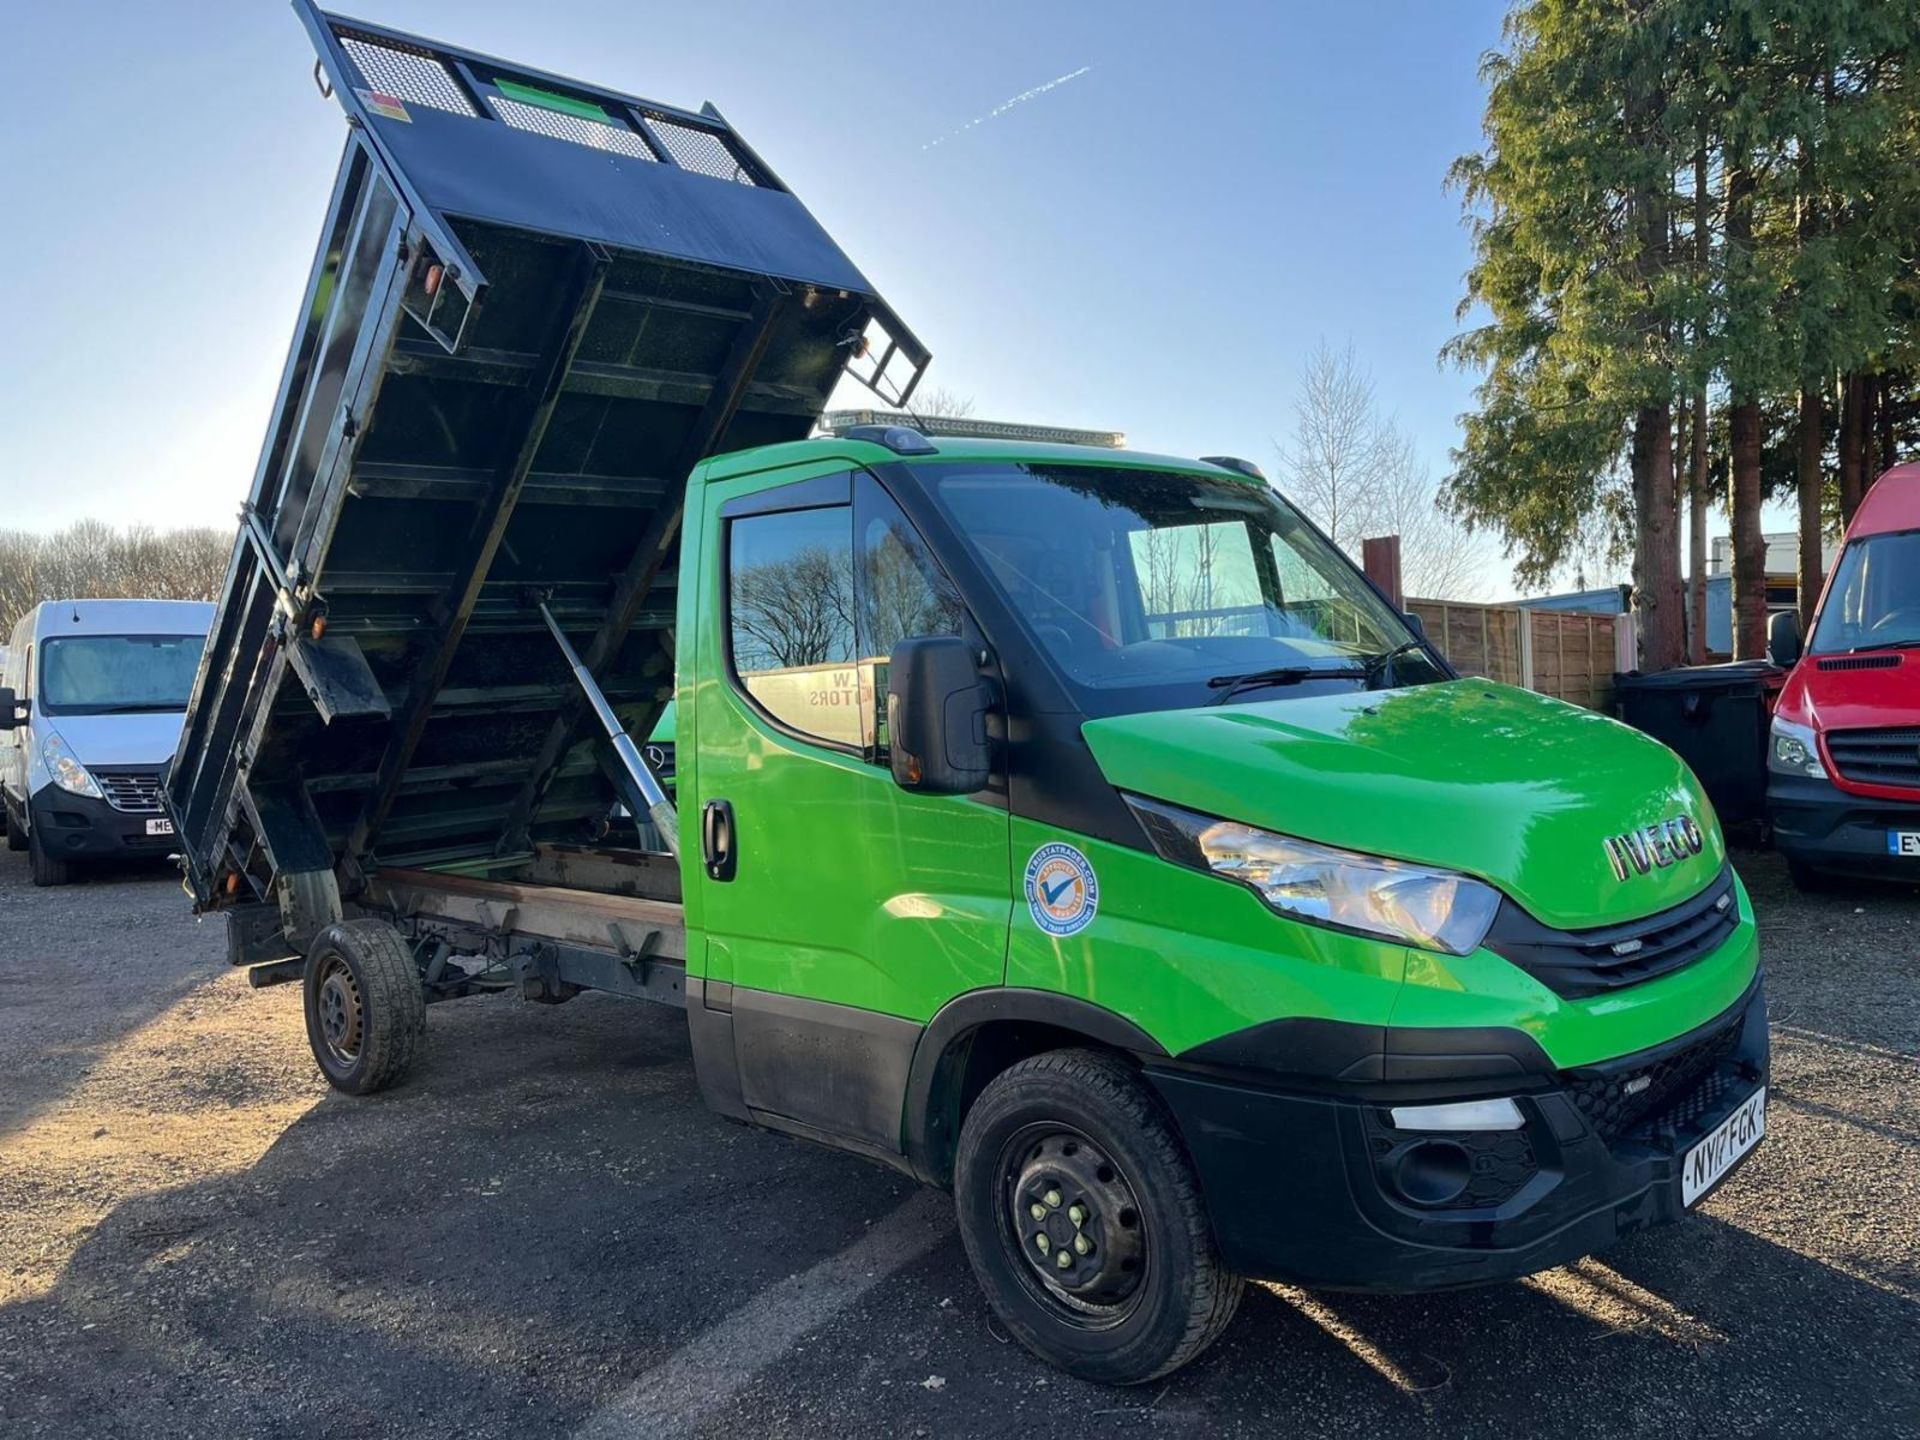 2017 IVECO DAILY 35S12 LONG WHEEL BASE 12FT TIPPER - POWERFUL AND EFFICIENT!